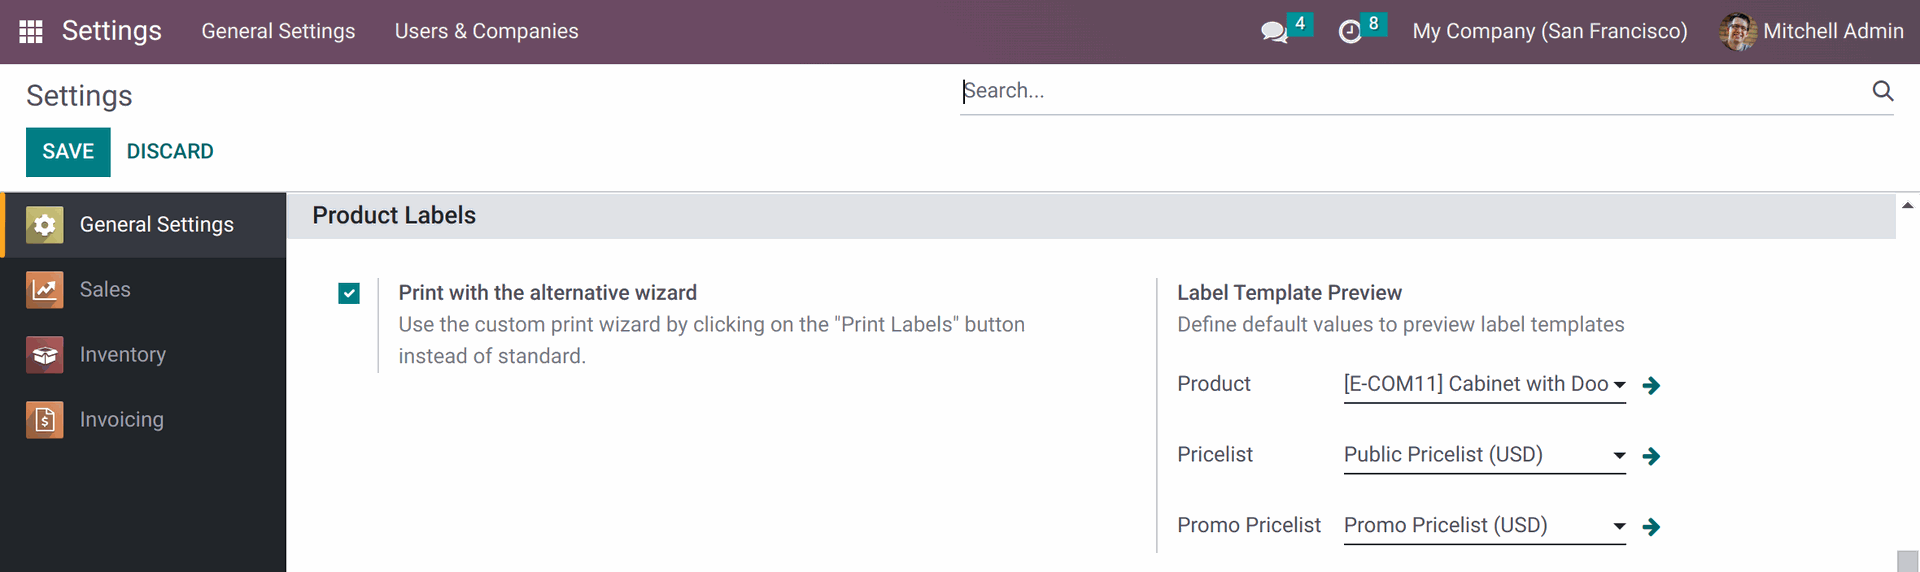 Odoo product label settings for template preview in 16.0